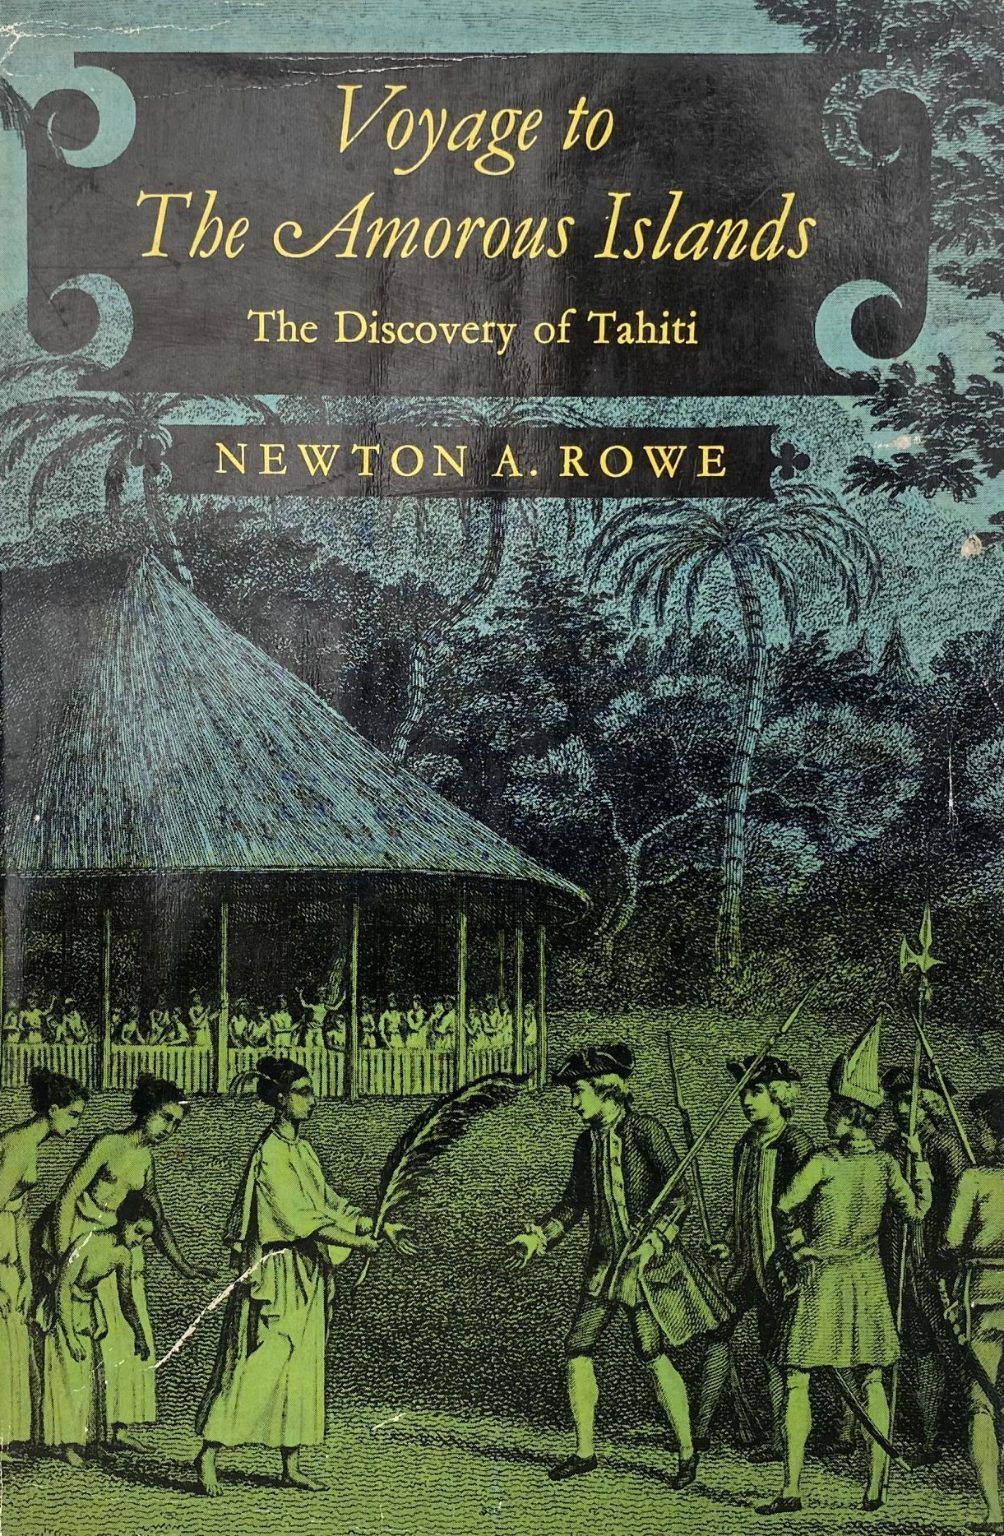 VOYAGE TO THE AMOROUS ISLANDS: The Discovery of Tahiti